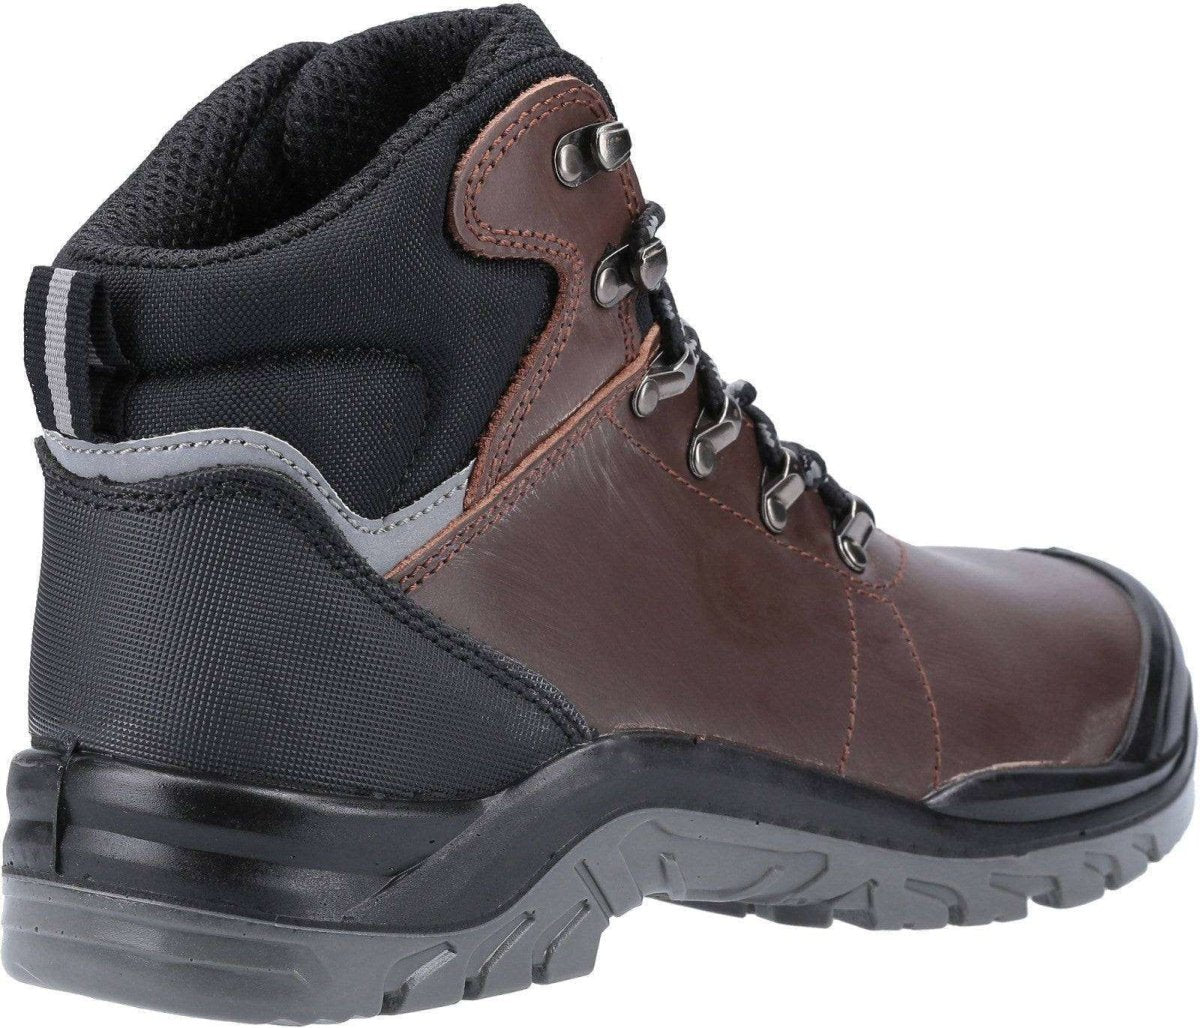 Amblers AS203 Laymore Water Resistant Steel Toe Cap Safety Boots - Shoe Store Direct